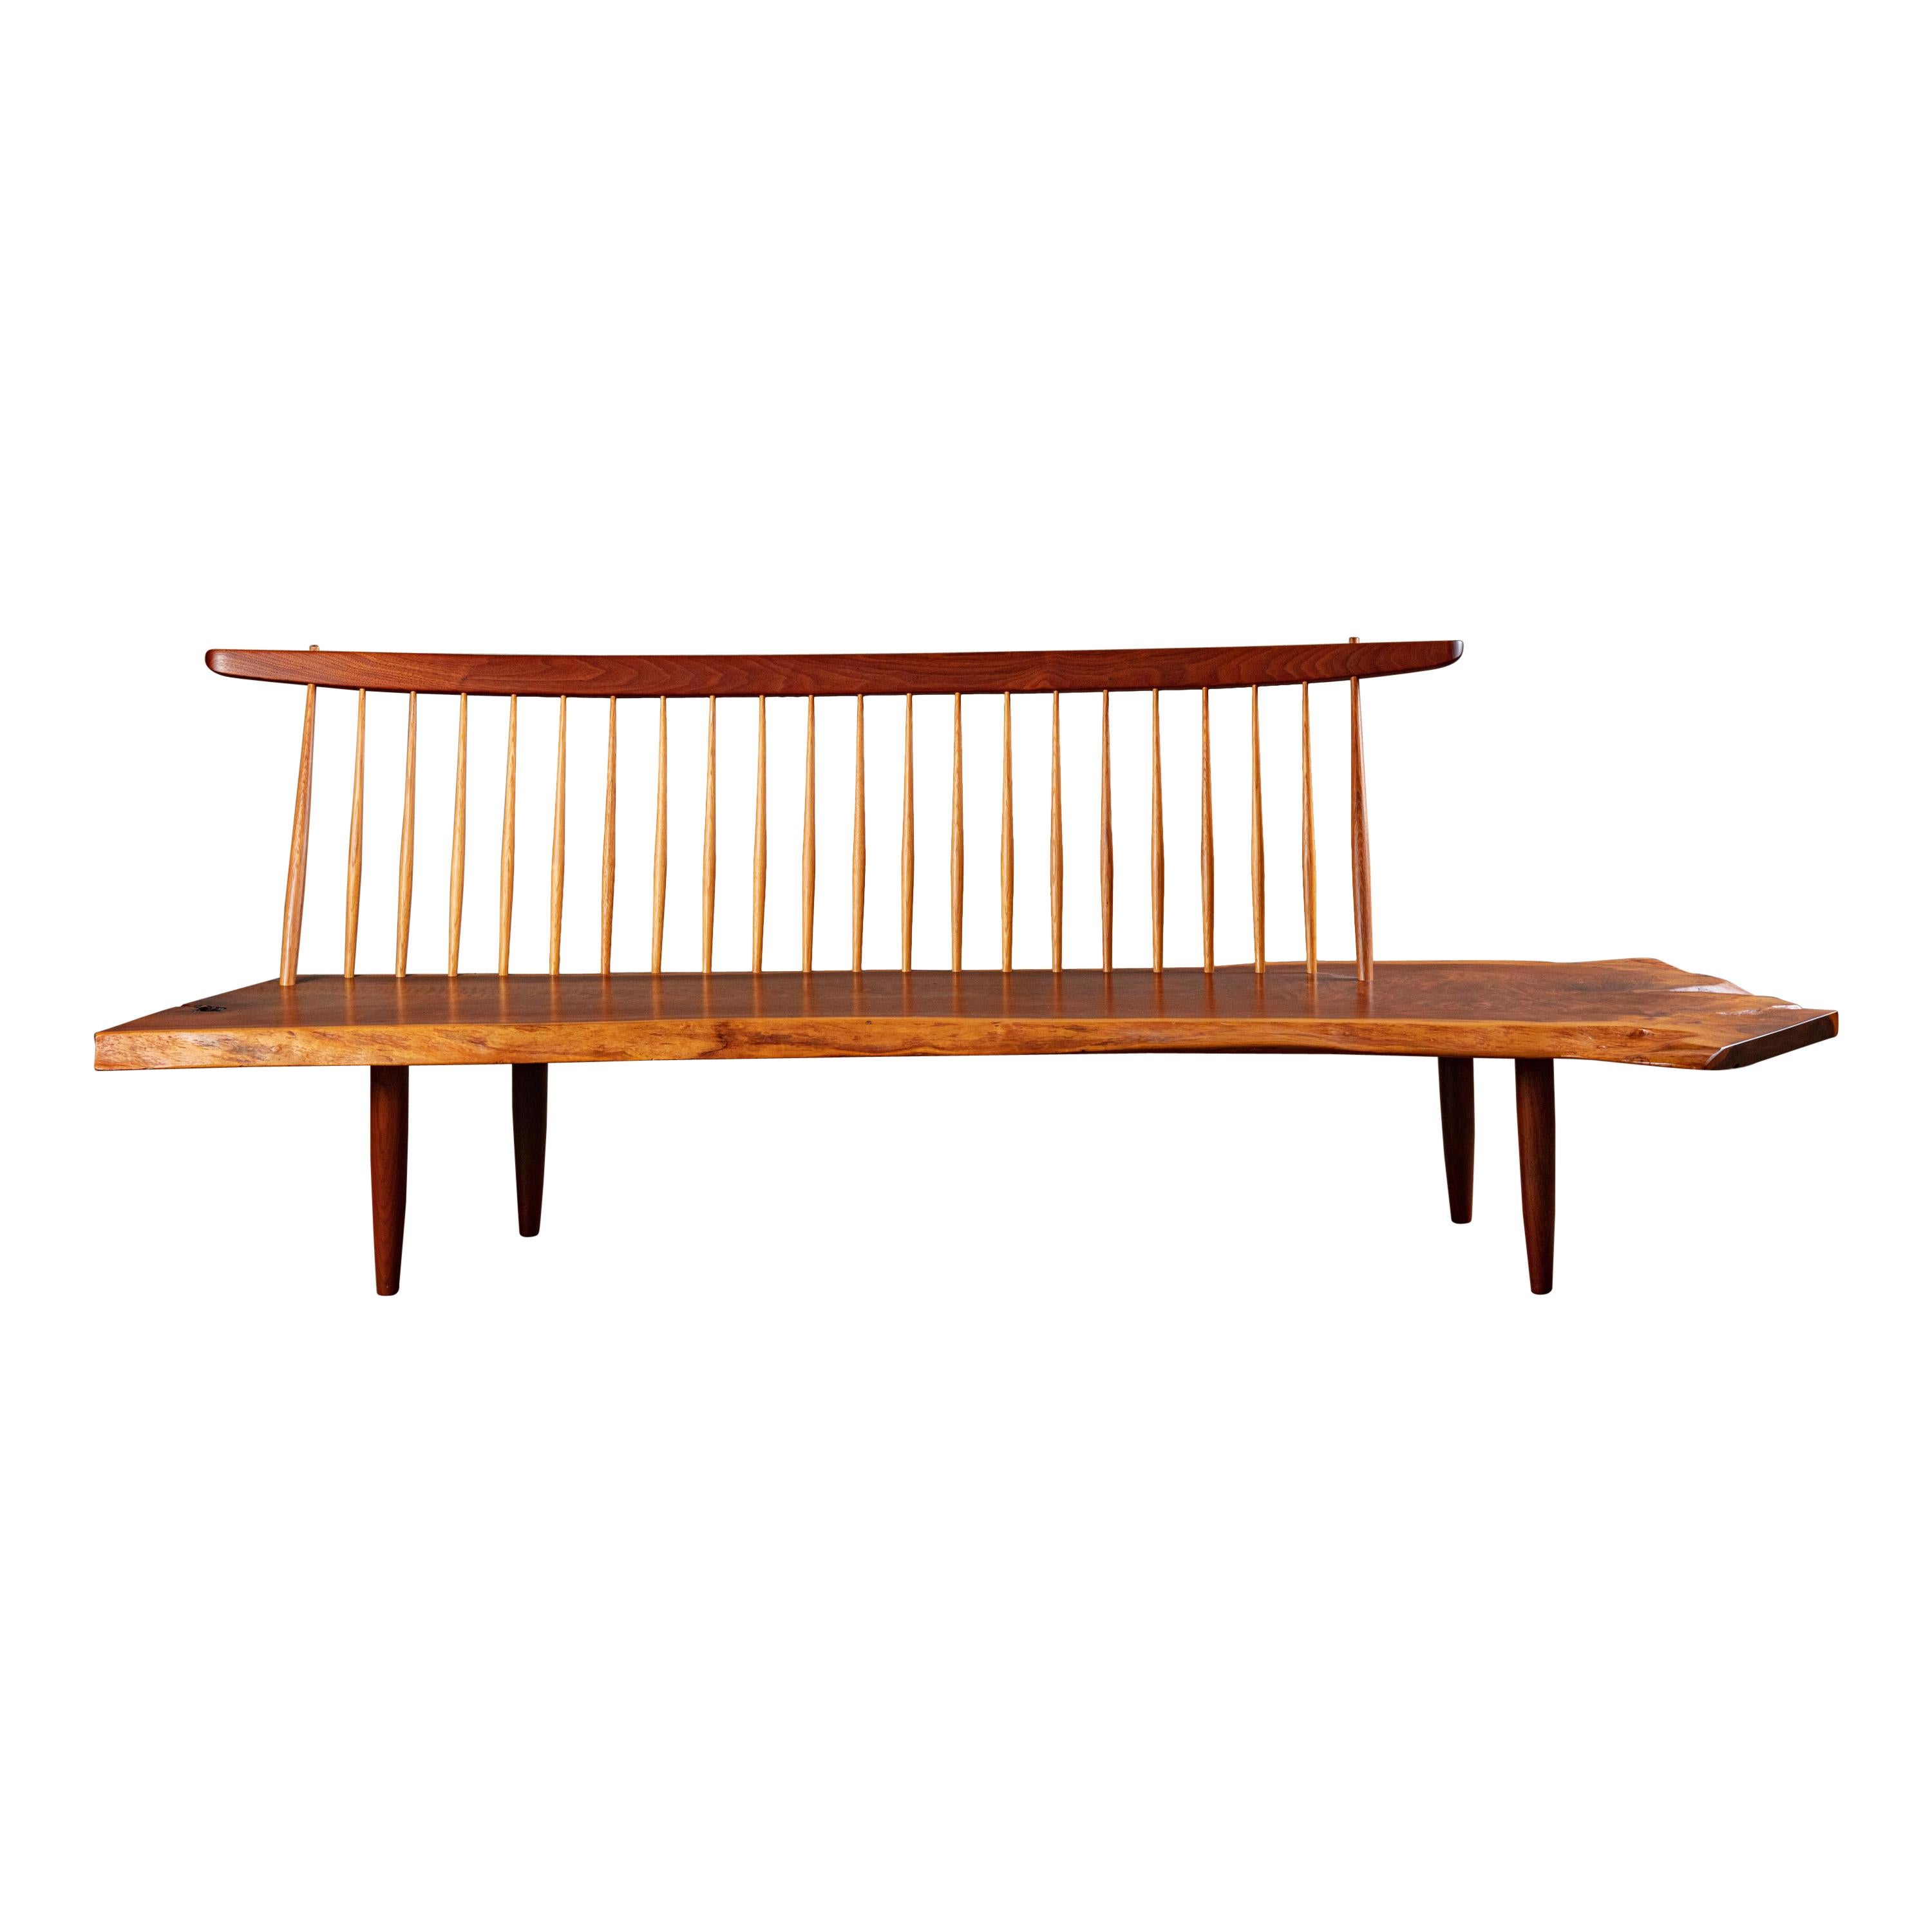 Second Deposit For George Nakashima 'Conoid' Bench